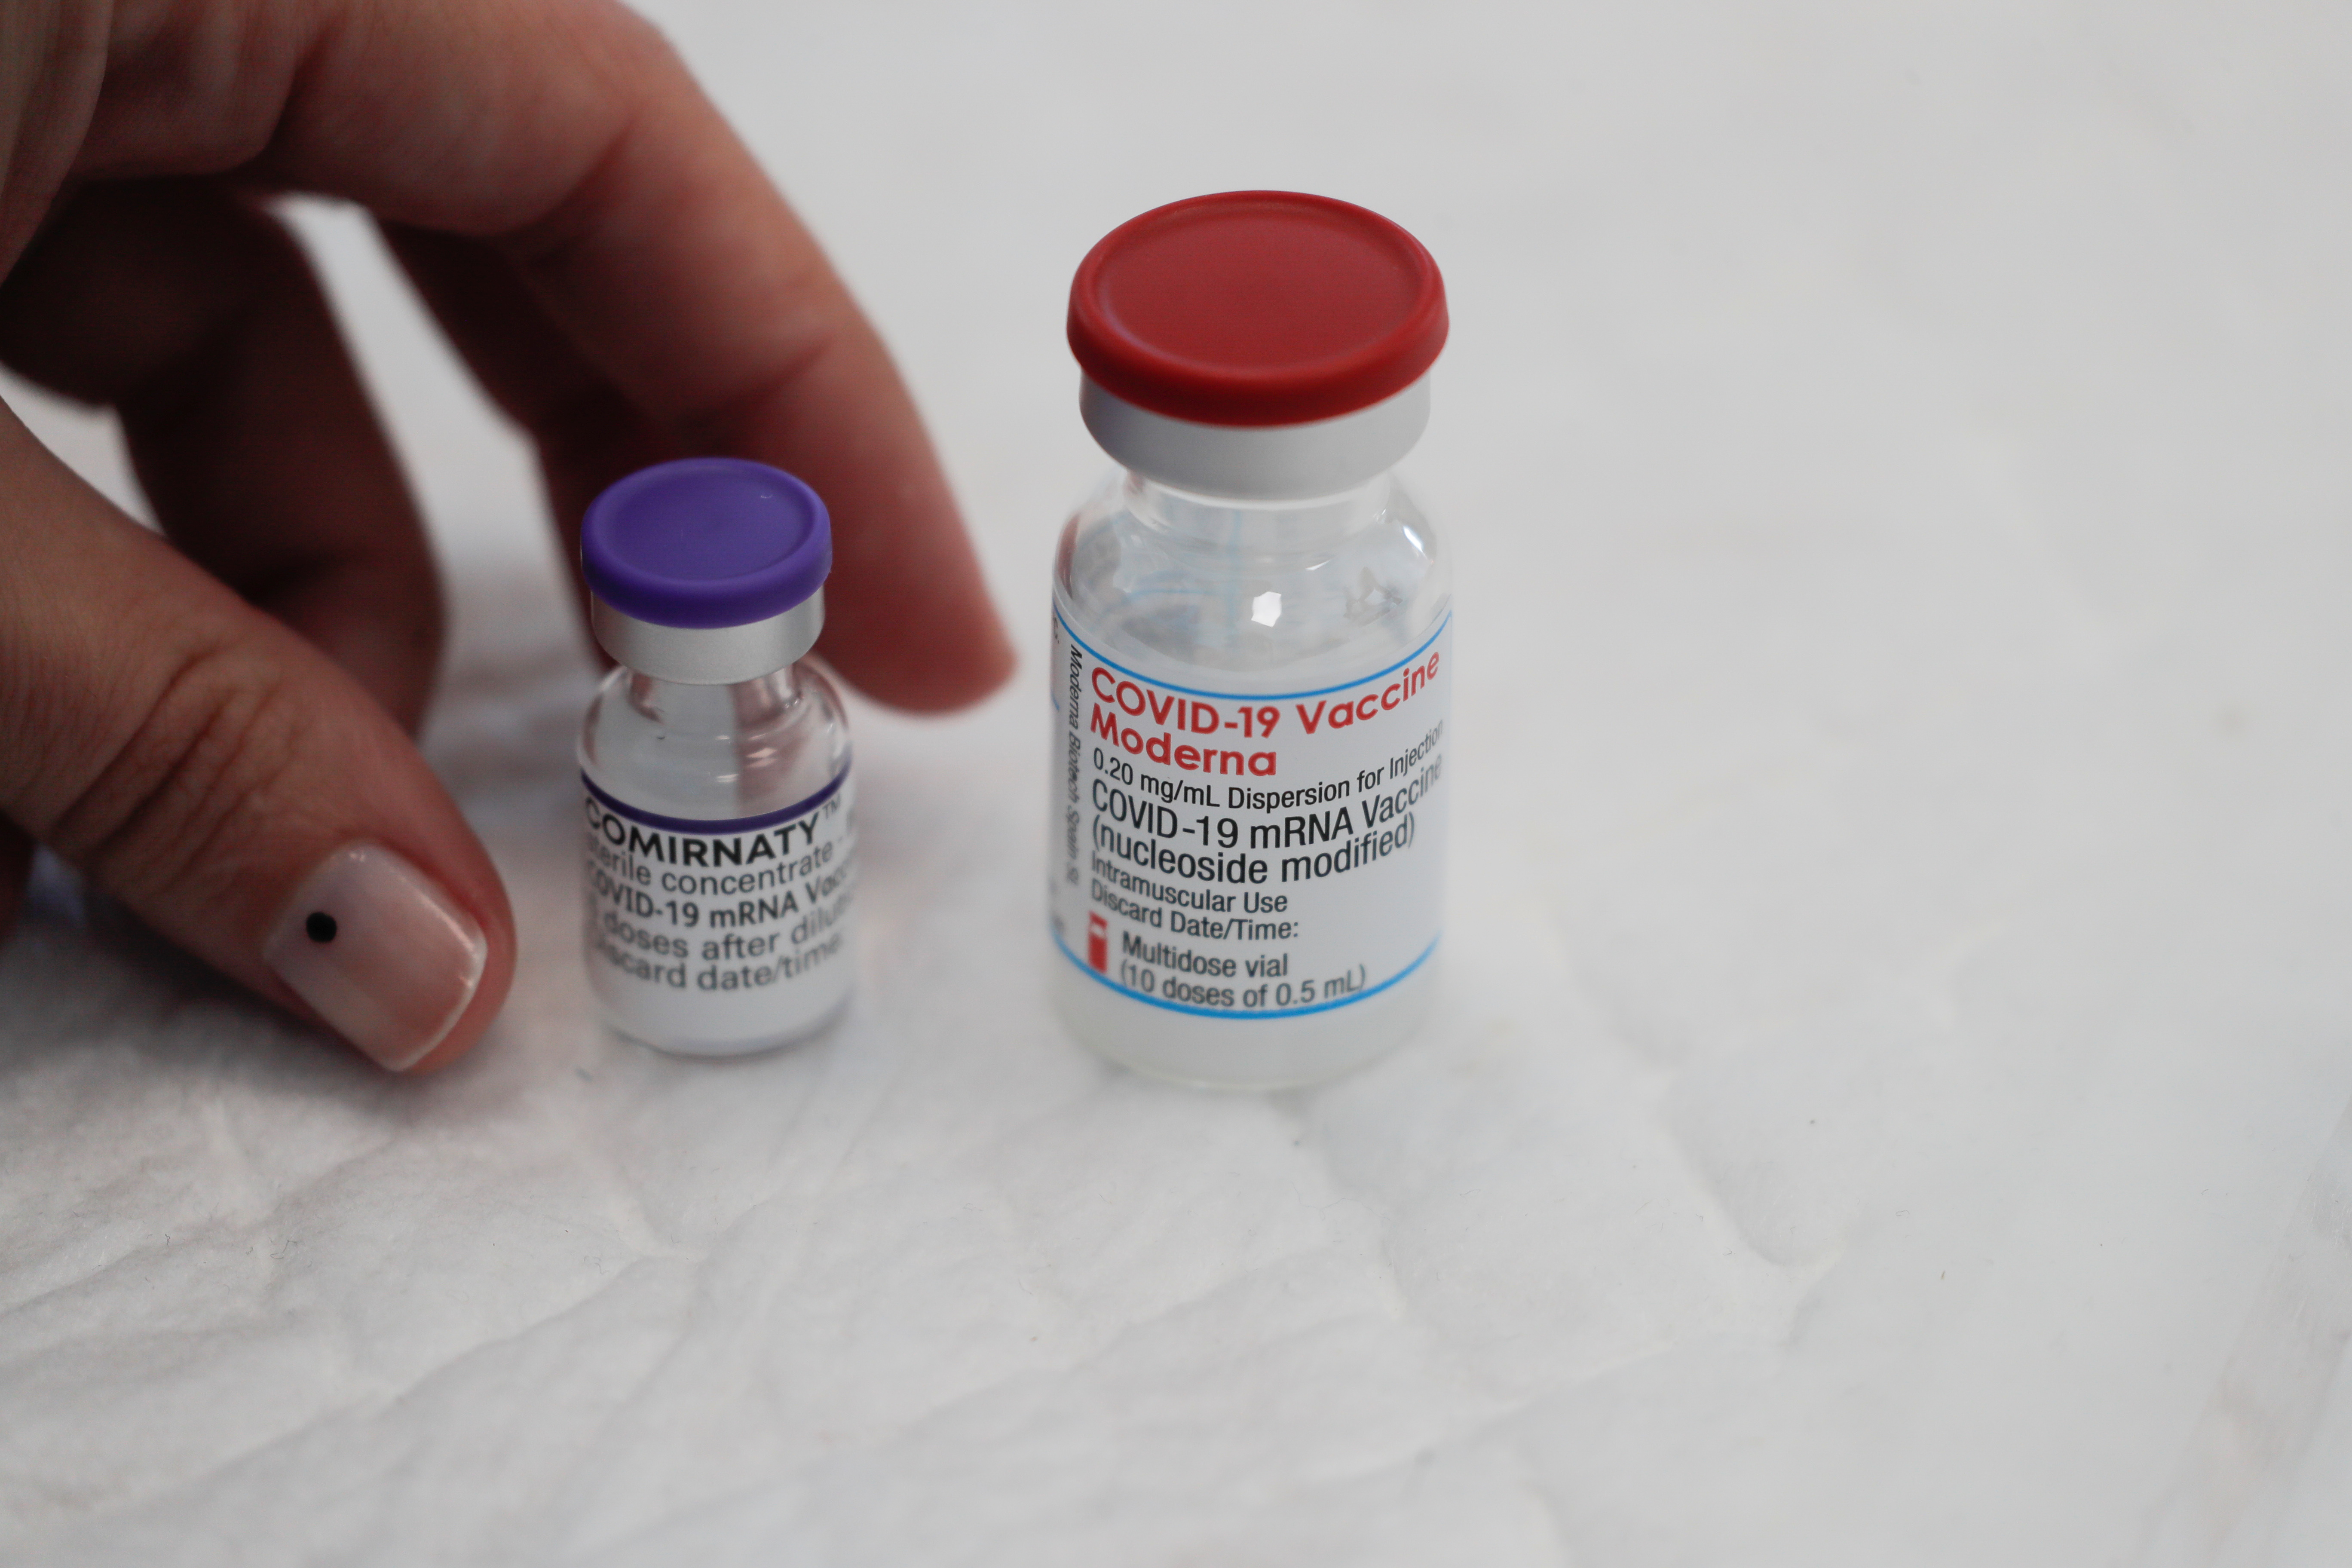 A healthcare worker places vials containing doses of the 